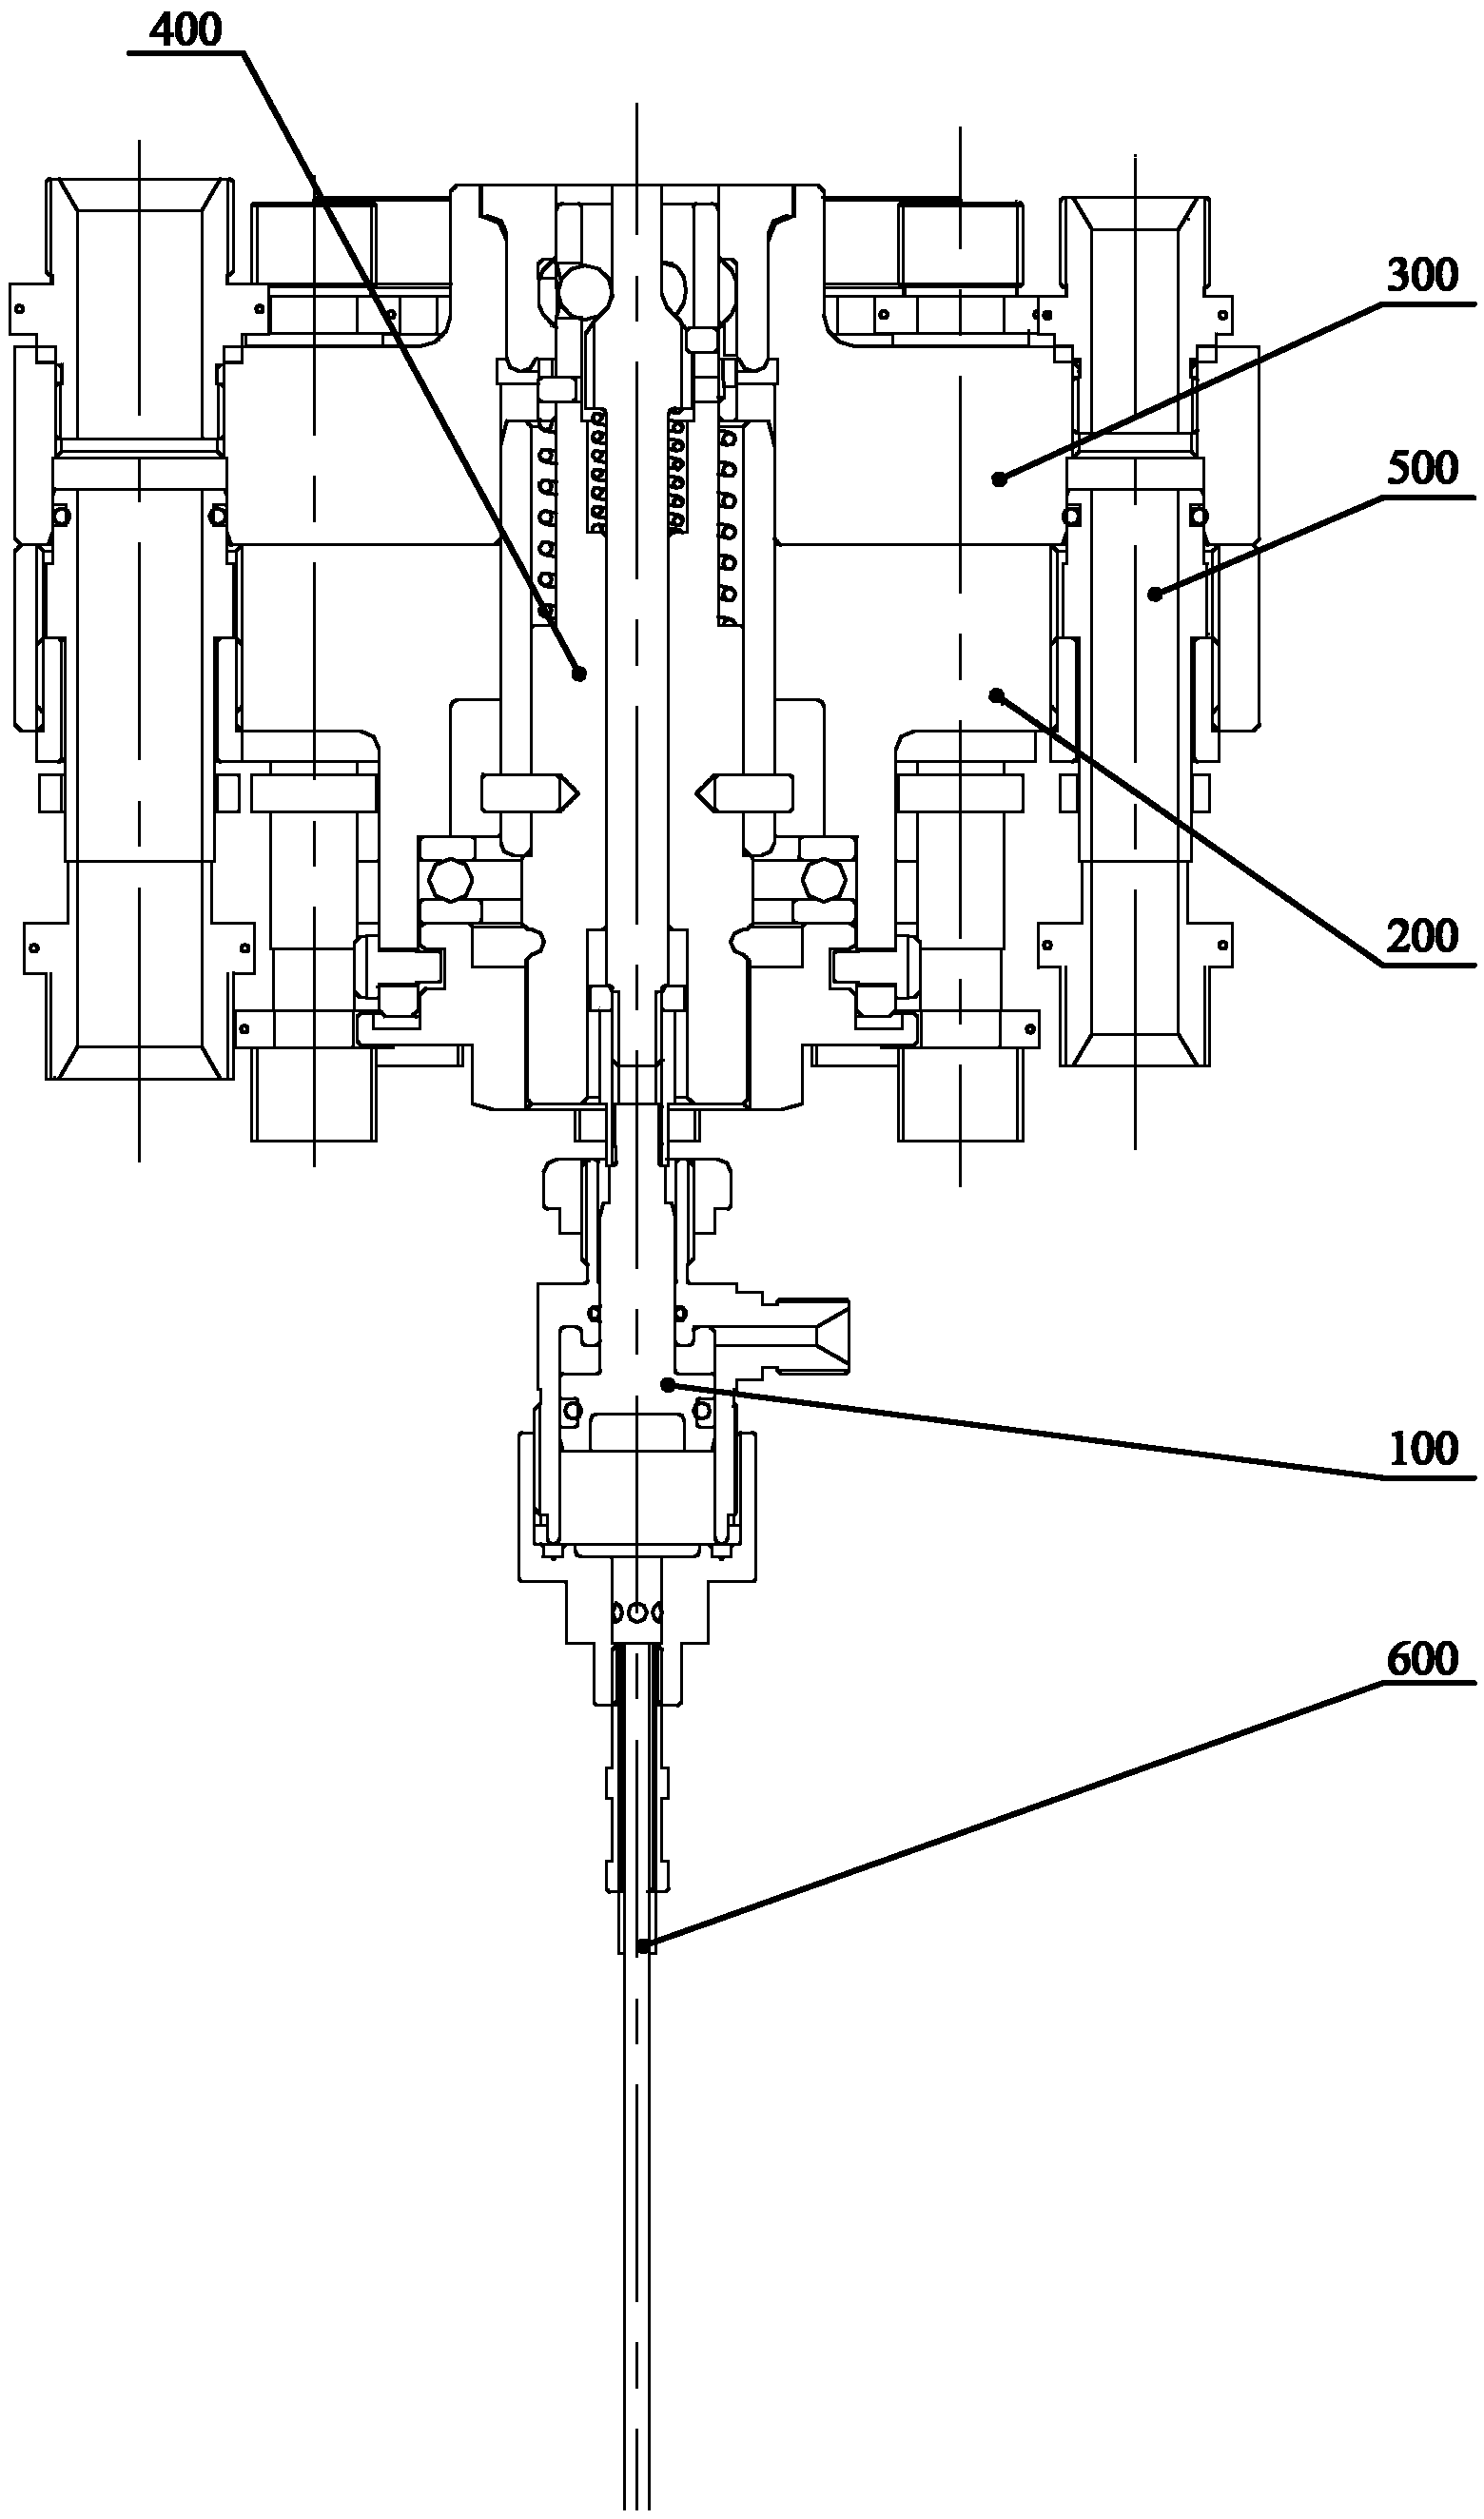 Air path inserting-pulling combined connector